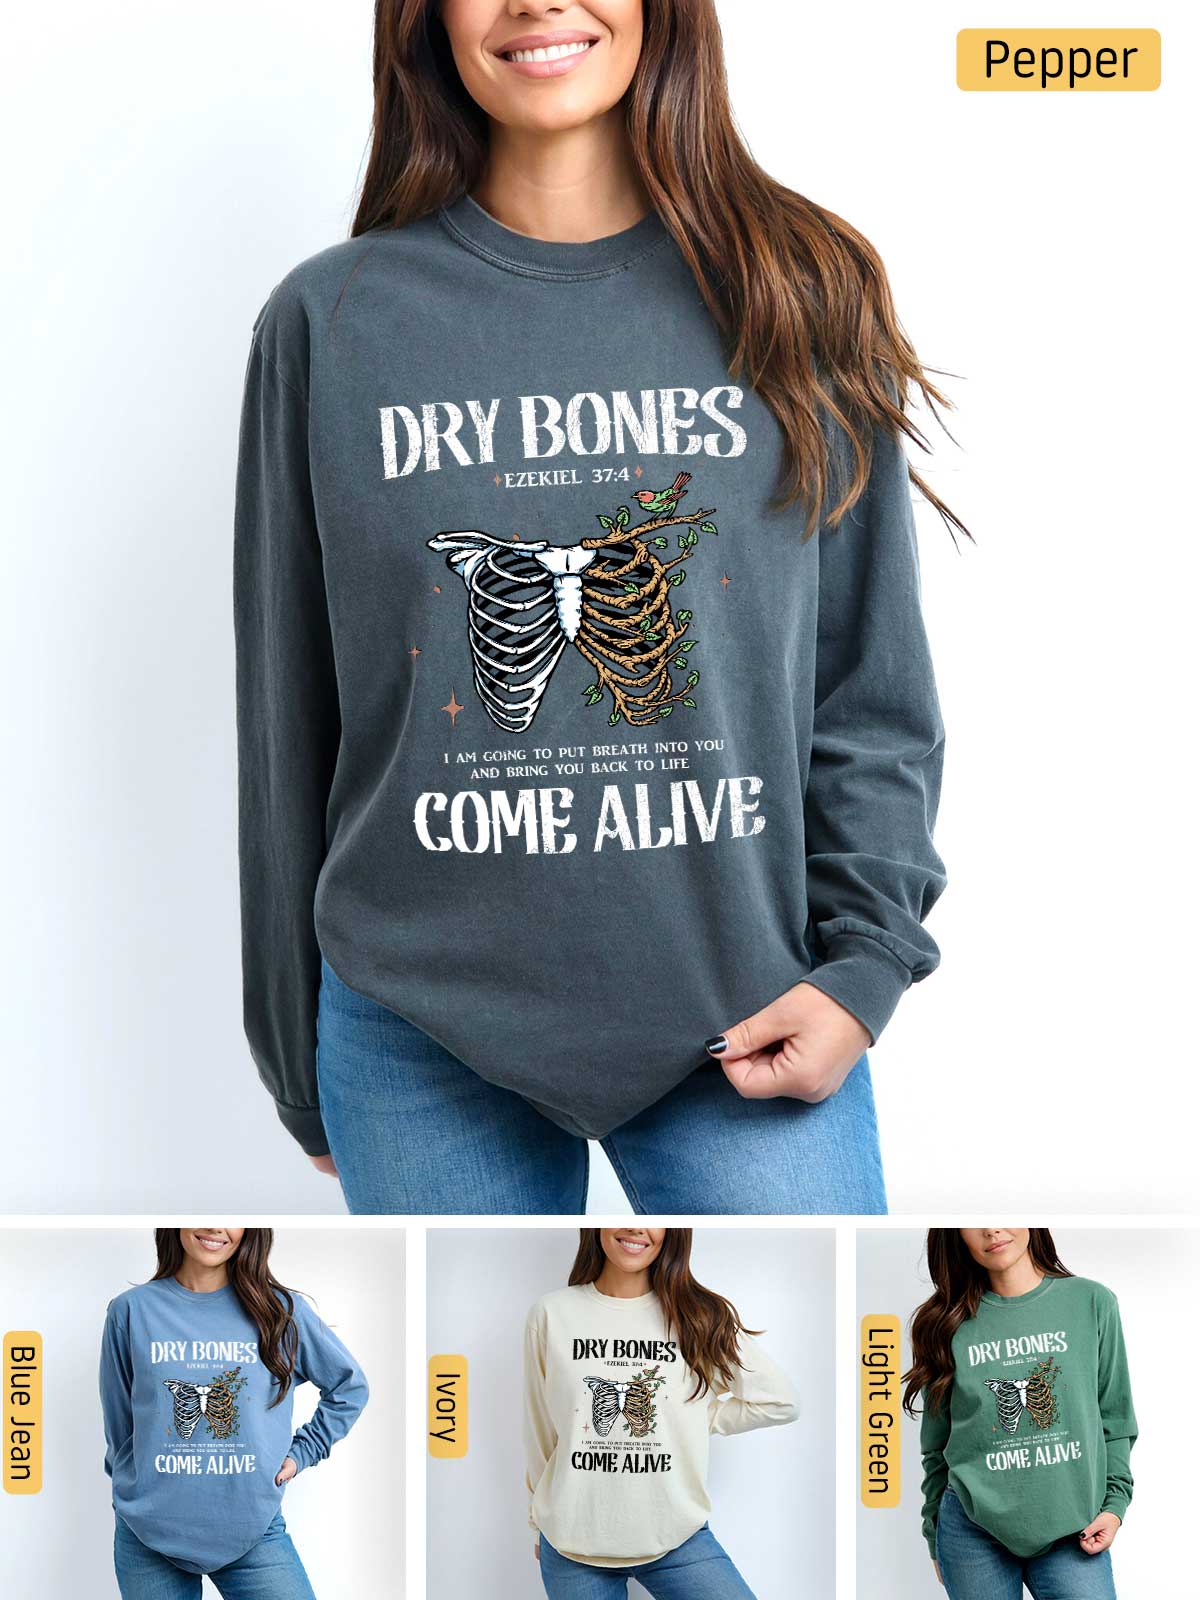 a woman wearing a sweater that says dry bones come alive